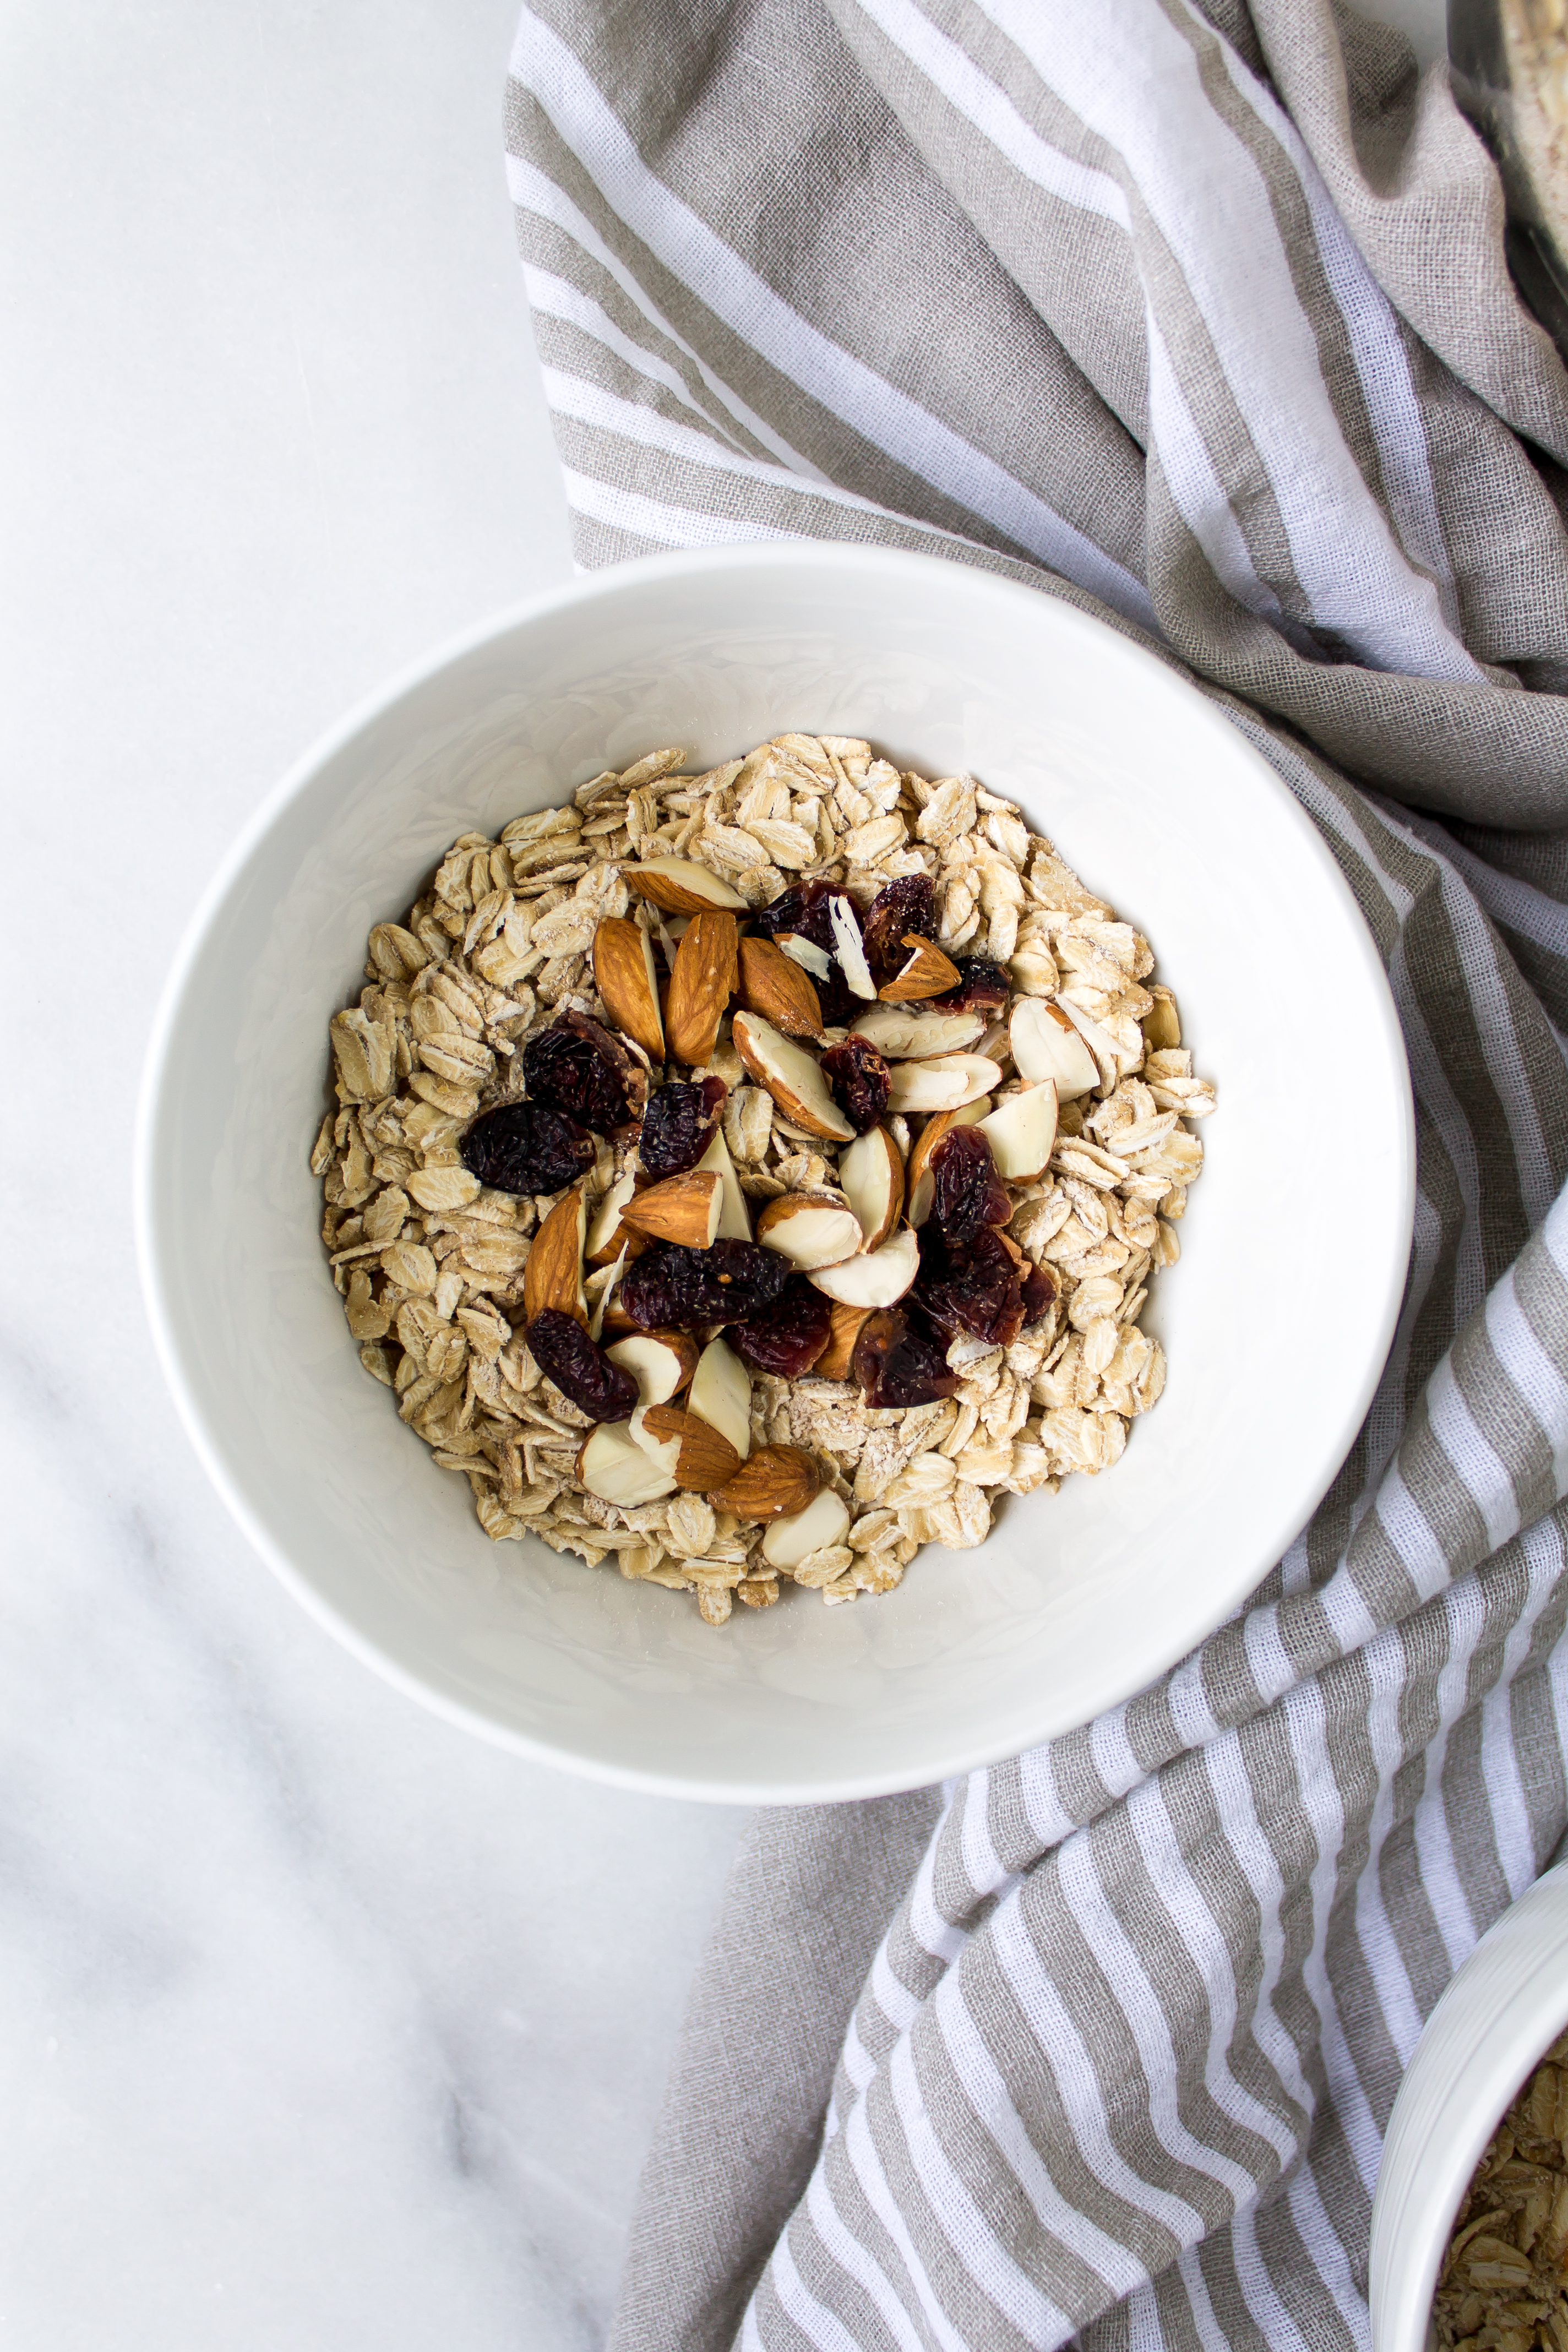 DIY instant oatmeal is the nutritious, easy way to start your busy mornings off right. It is portable and there are so many options for toppings! | Pass the Cookies | www.passthecookies.com